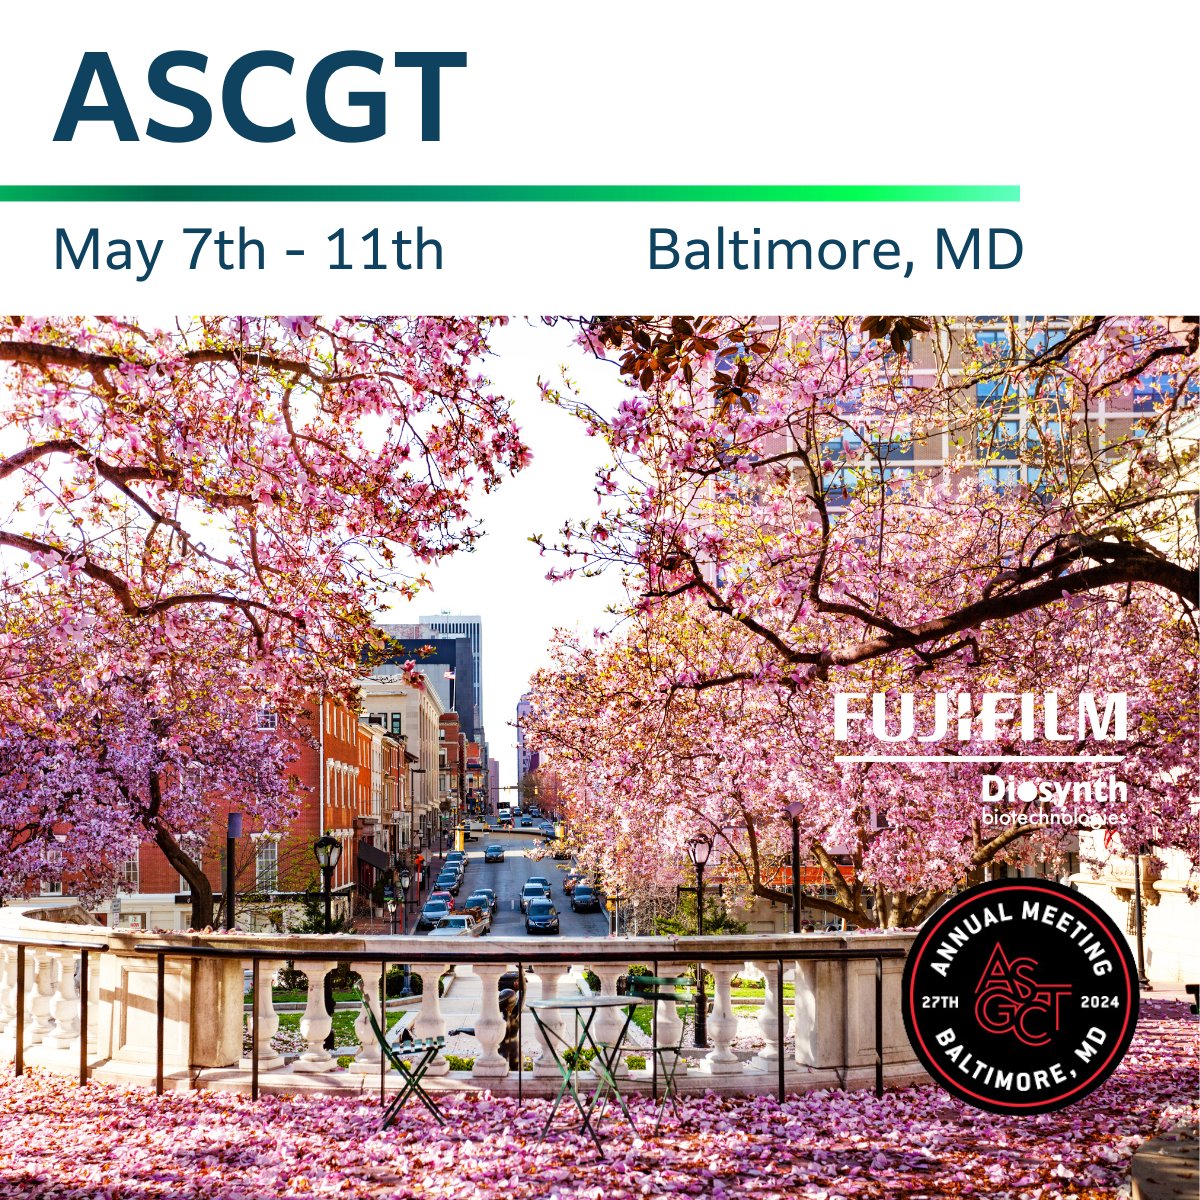 FUJIFILM Diosynth Biotechnologies will be a sponsor at ASGCT from May 7-11, 2024, in Baltimore, MD! Schedule a meeting with our team via the event app or stop by booth 1927 to discover how we can help you advance and deliver tomorrow's medicines! #ASGCT #Biotech